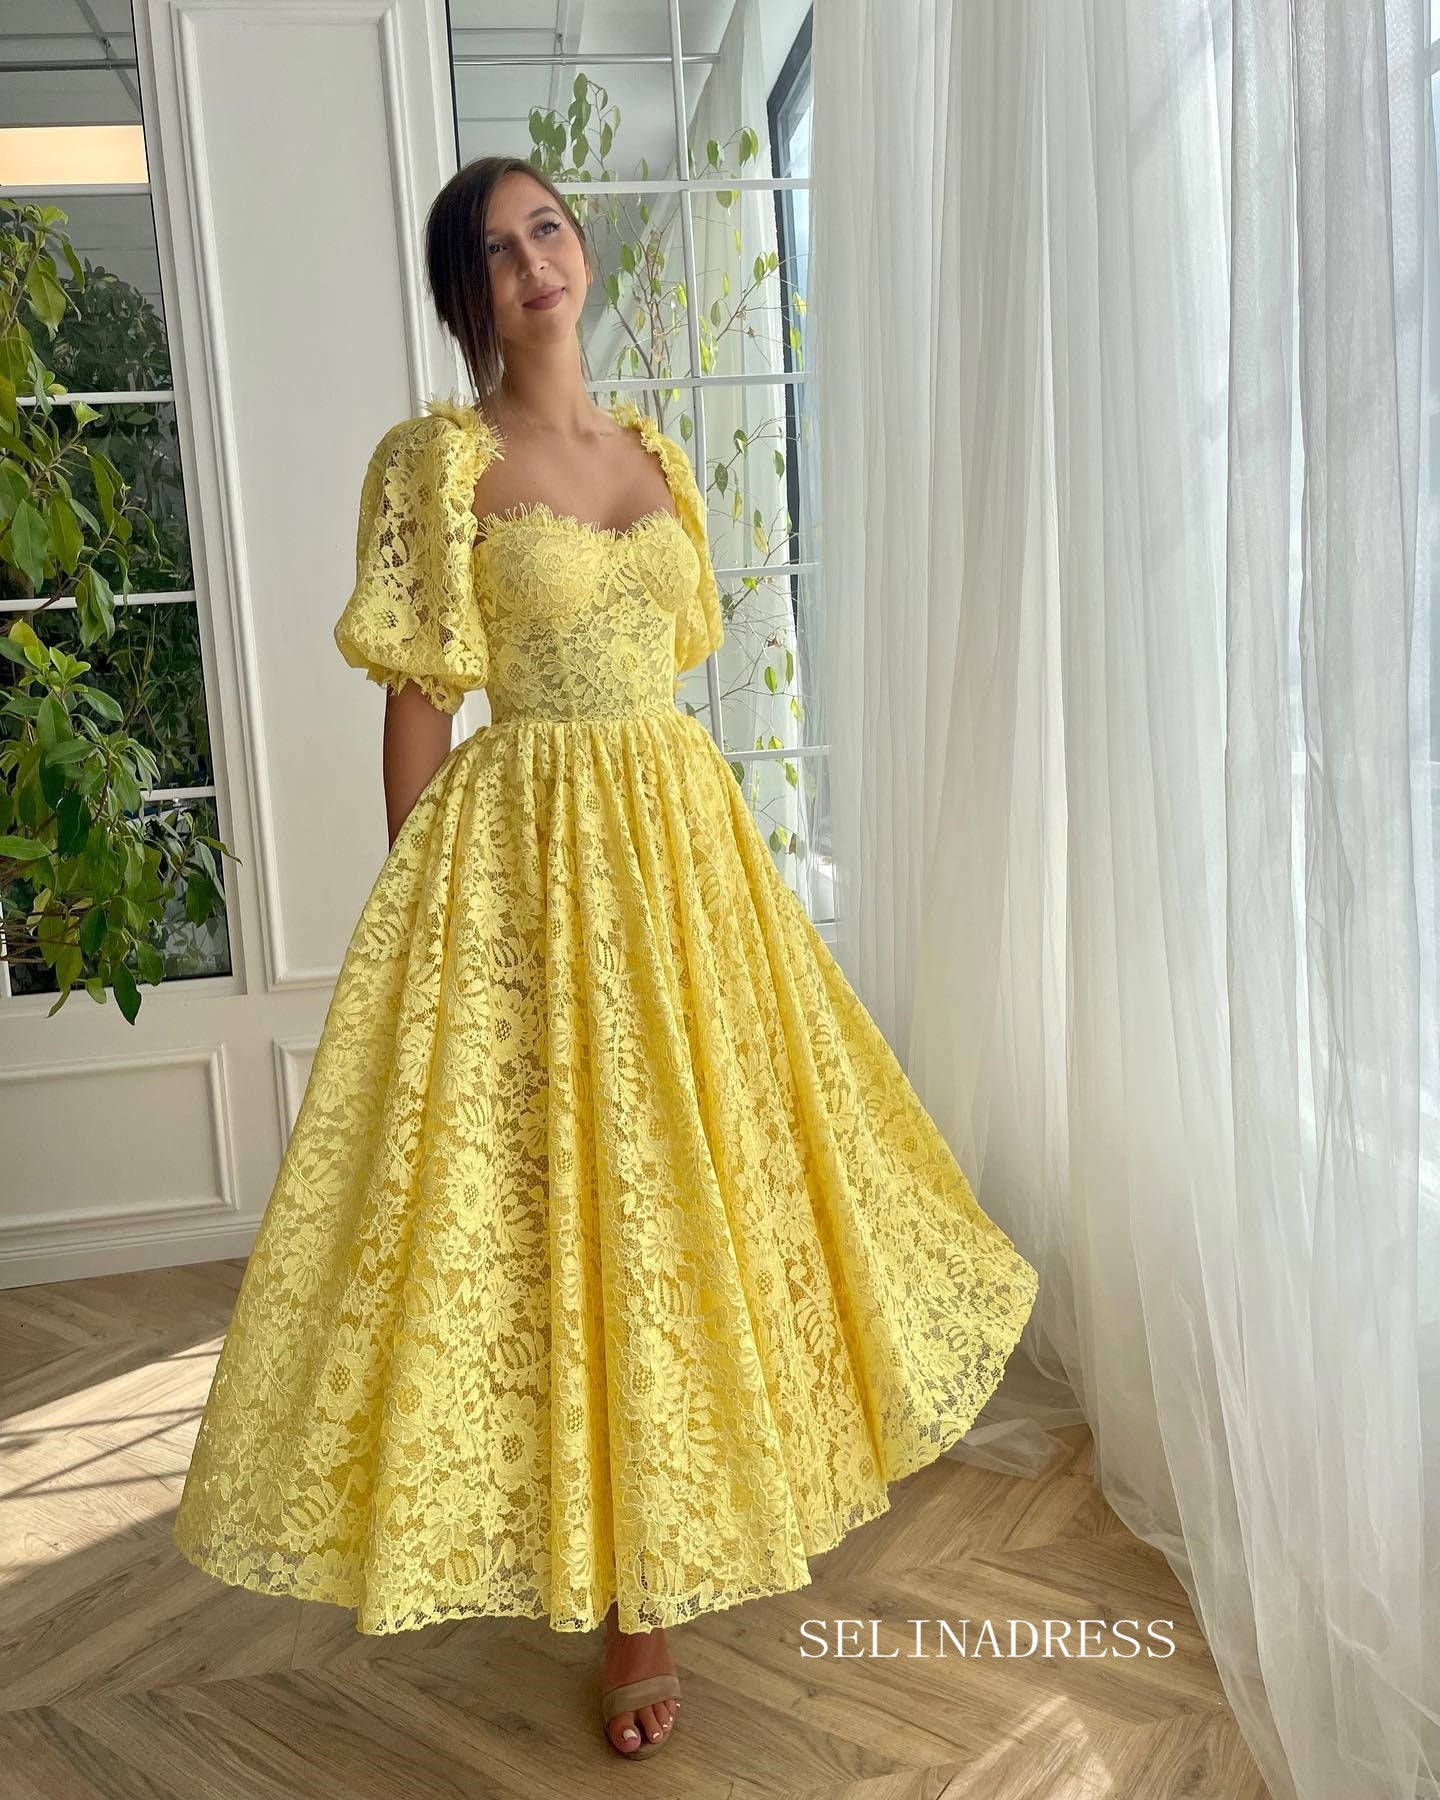 Beaded Yellow Ball Gown Flower Birthday Dress With Sheer Jewel Neckline, 3D  Applique, And Tulle Skirt Perfect For Weddings, Pageants, First Communion,  Or Special Occasions From Weddingsalon, $87.66 | DHgate.Com